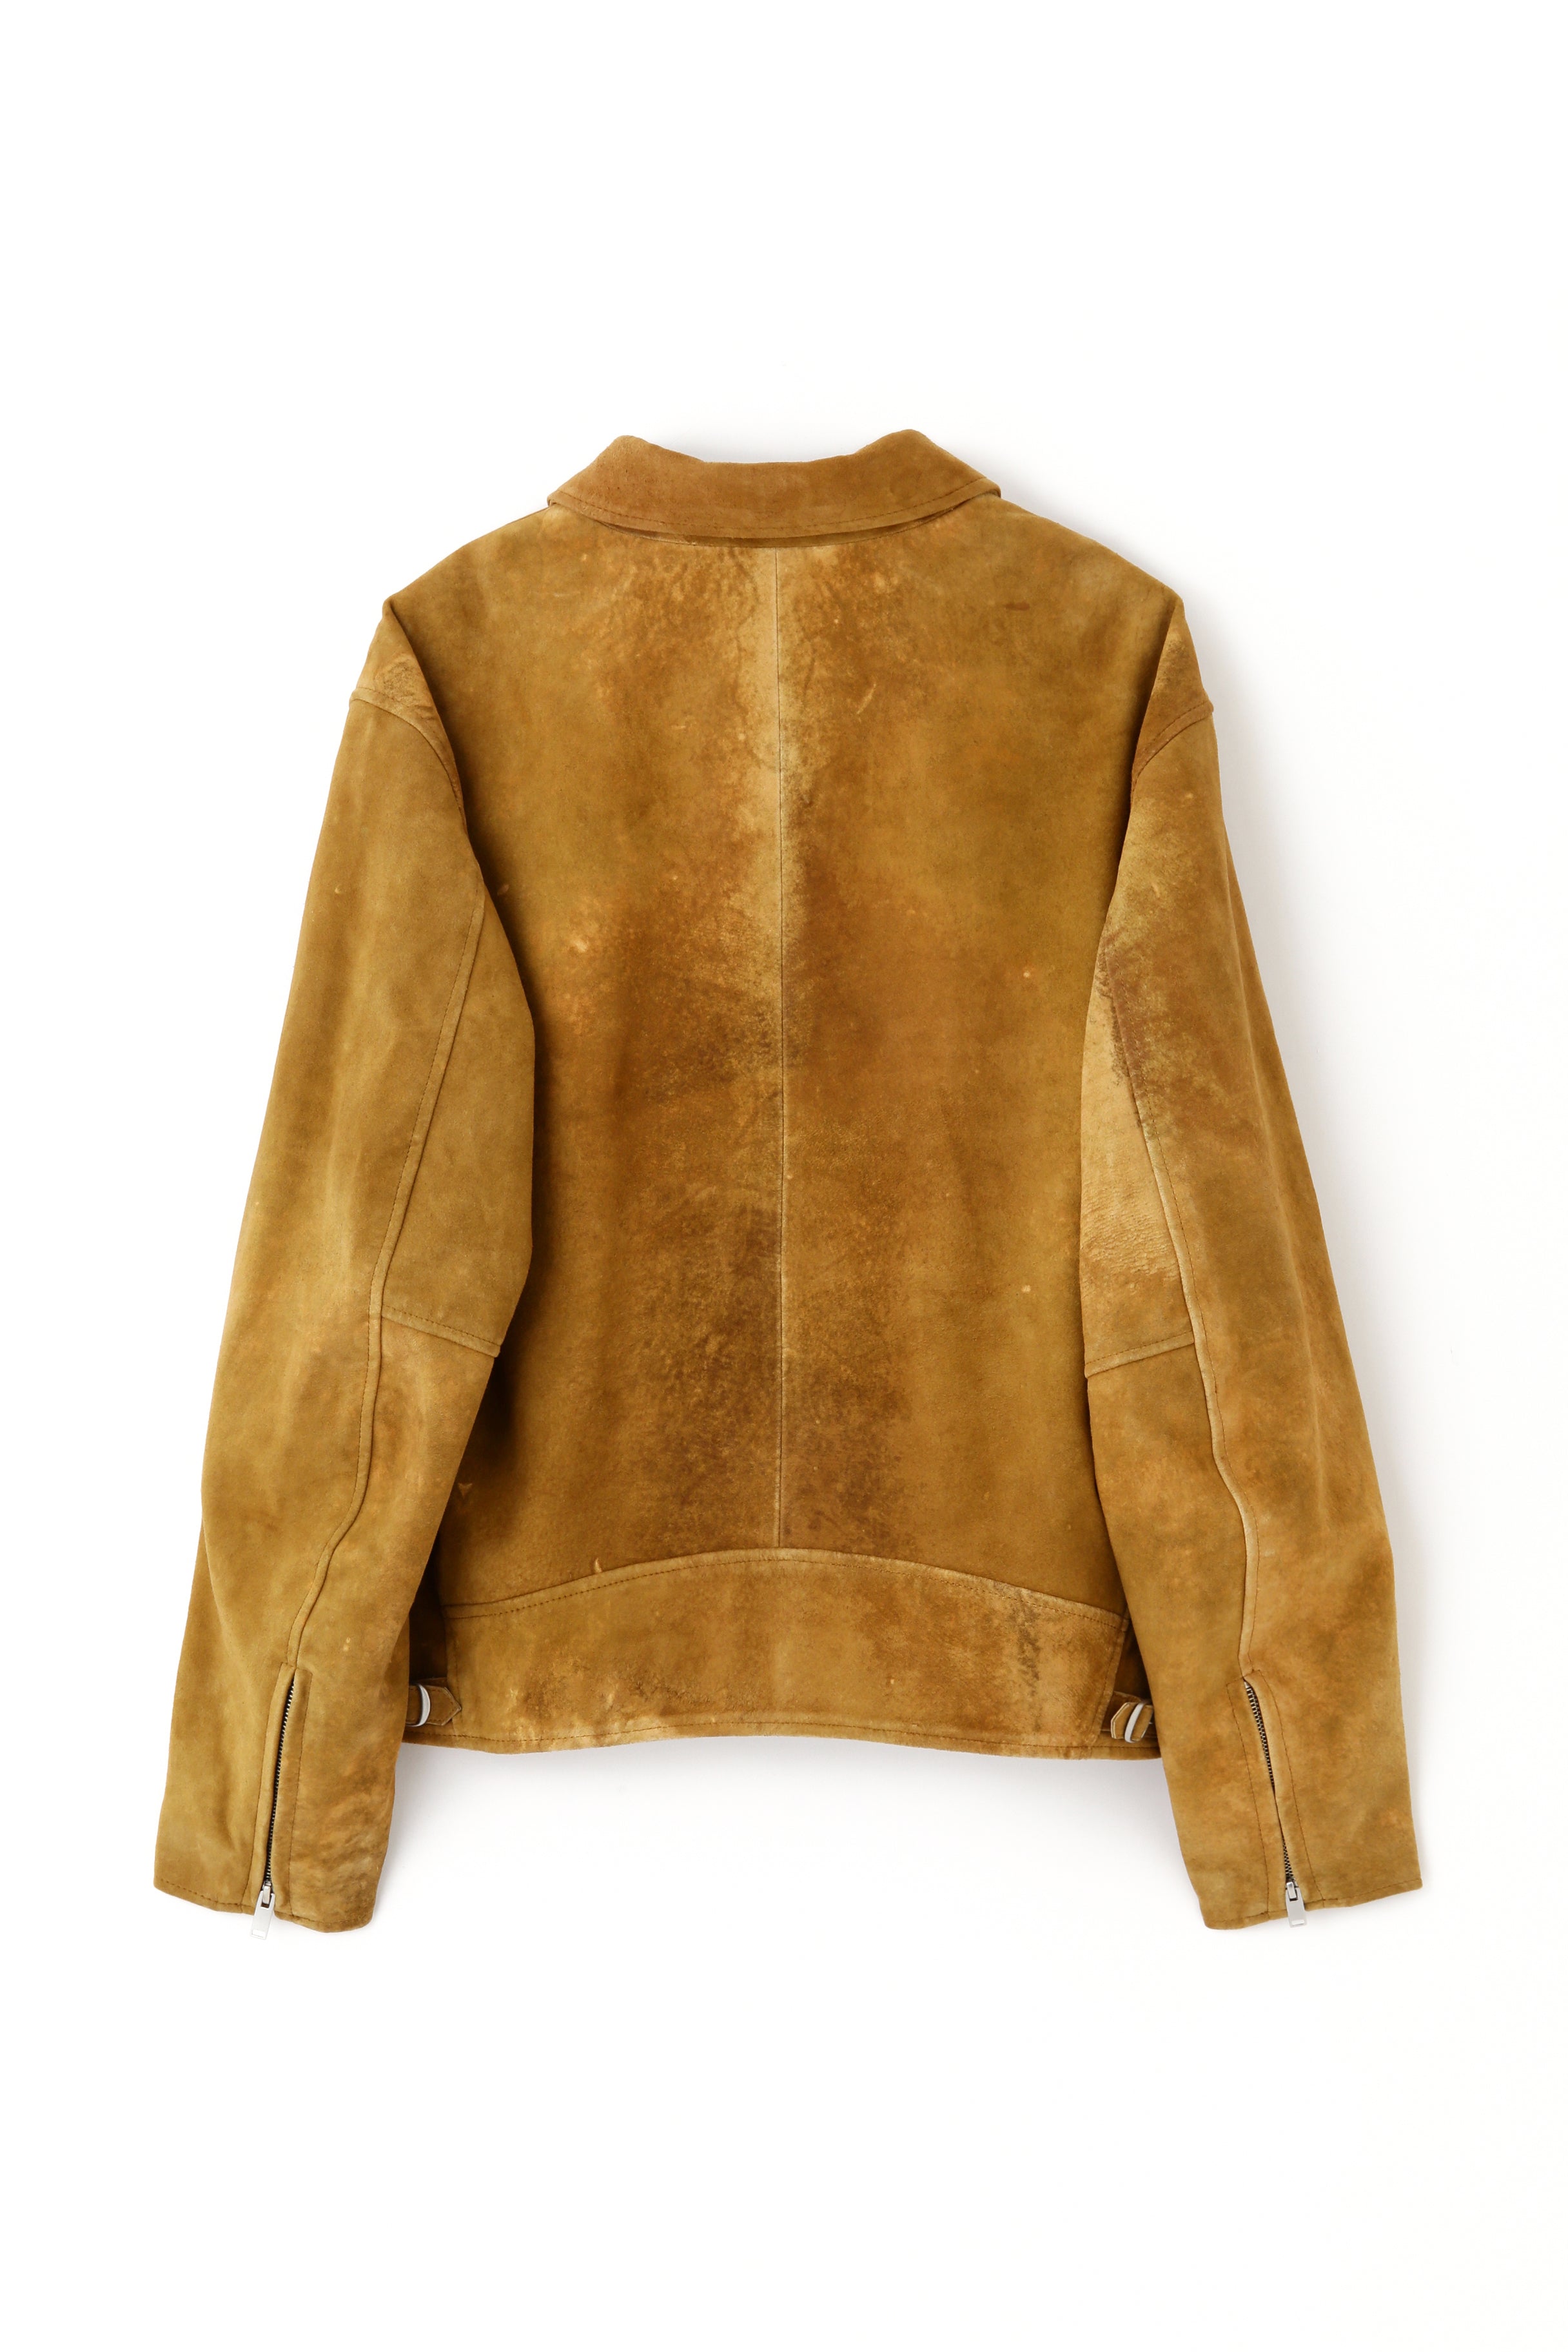 SUEDE LEATHER RIDERS JACKET -Sheep suede cashmere finish ...